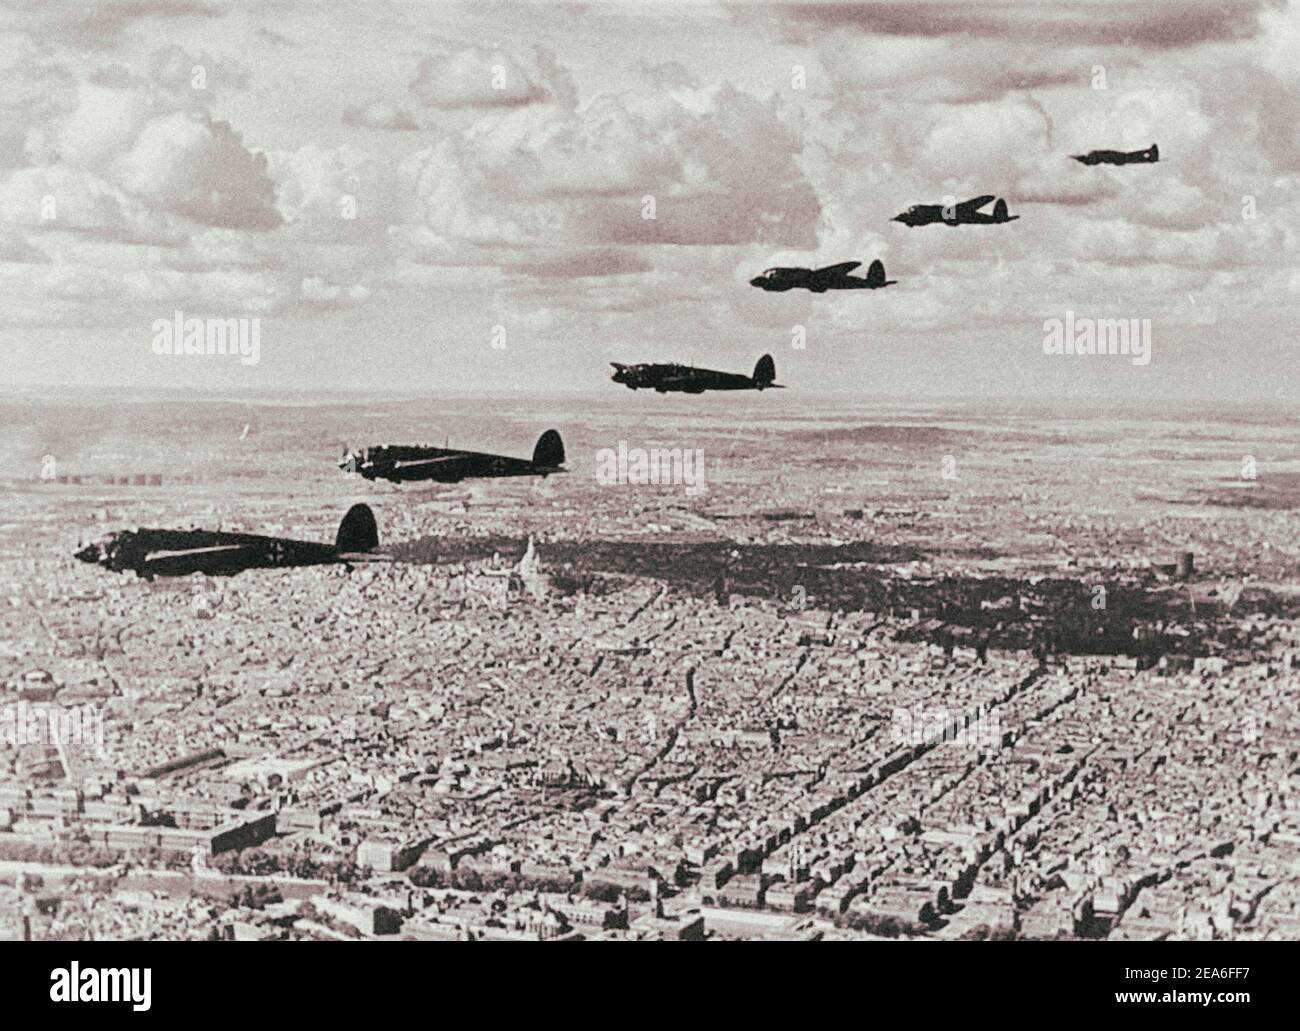 A squadron of German Heinkel He-111 two-engine bombers from the Nazi Luftwaffe in the sky over Paris. France. 1940 Stock Photo